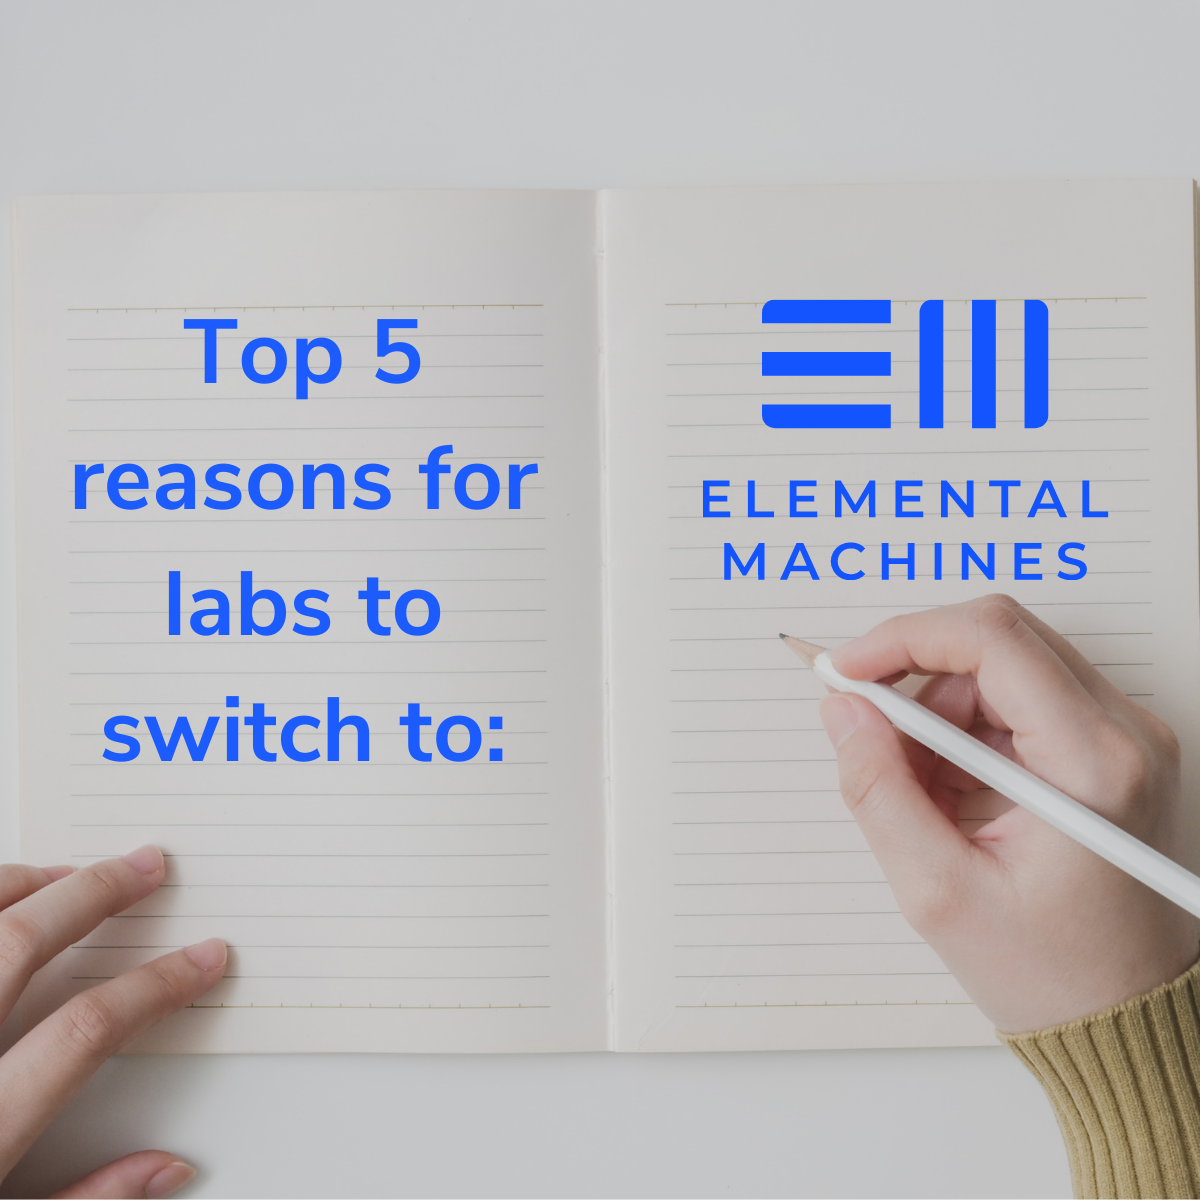 5 reasons labs should switch to Elemental Machines for alerting & monitoring